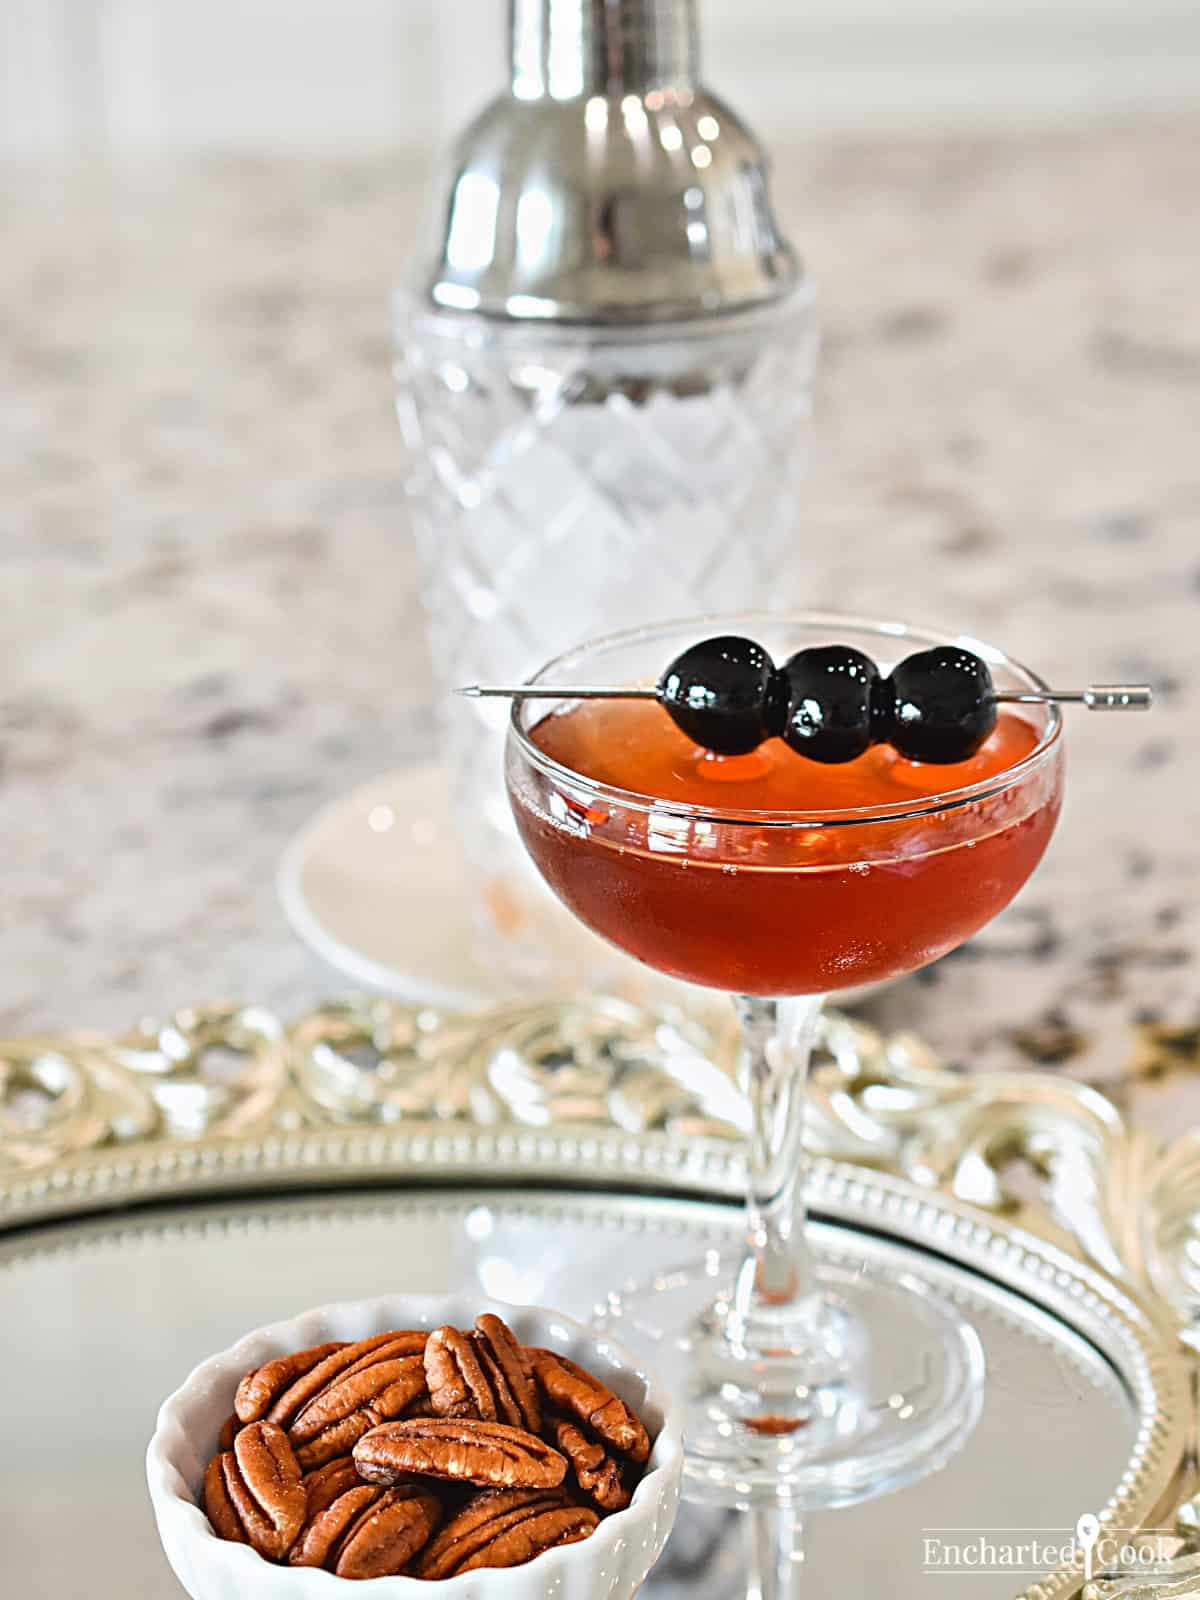 The cocktail in a coupe glass garnished with cocktail cherries.